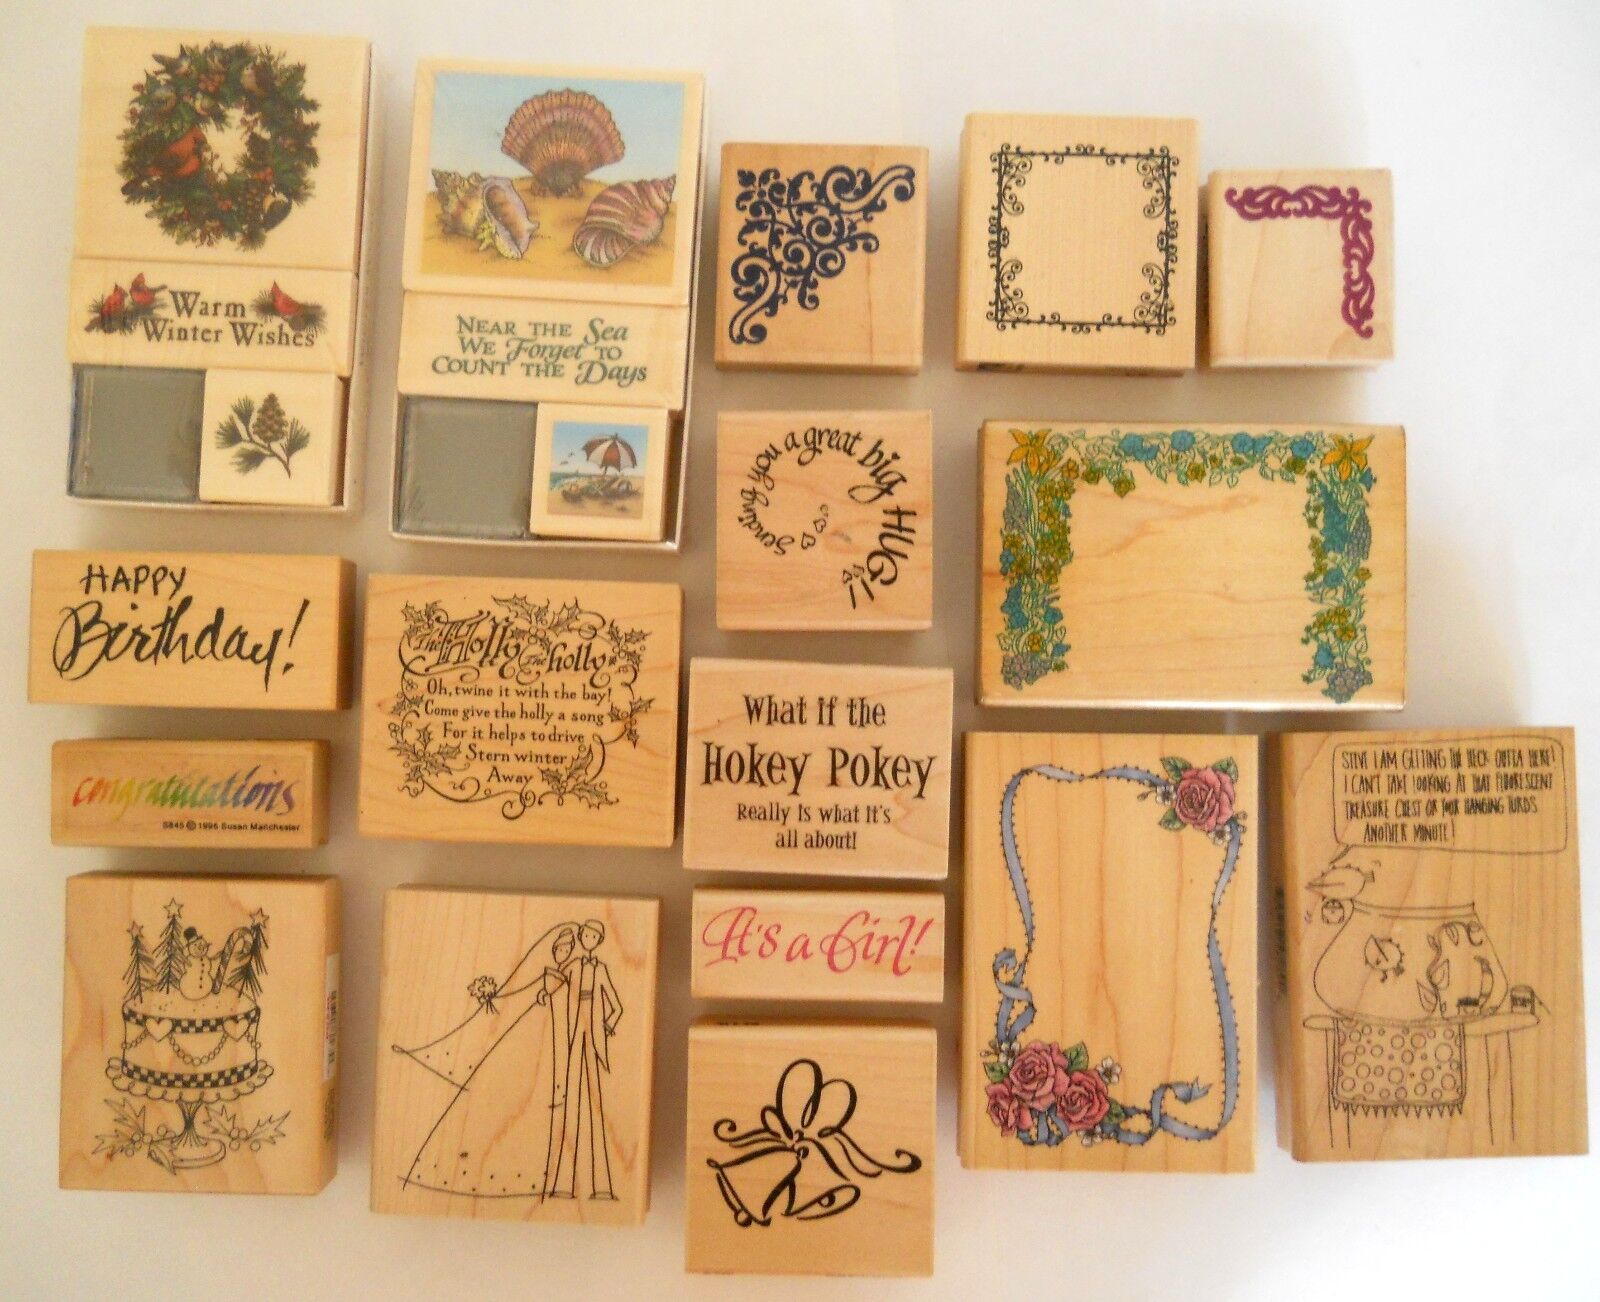 LOT of 21 RUBBER STAMPS Inkadinkado, Stampendous, Inky after dark ...New